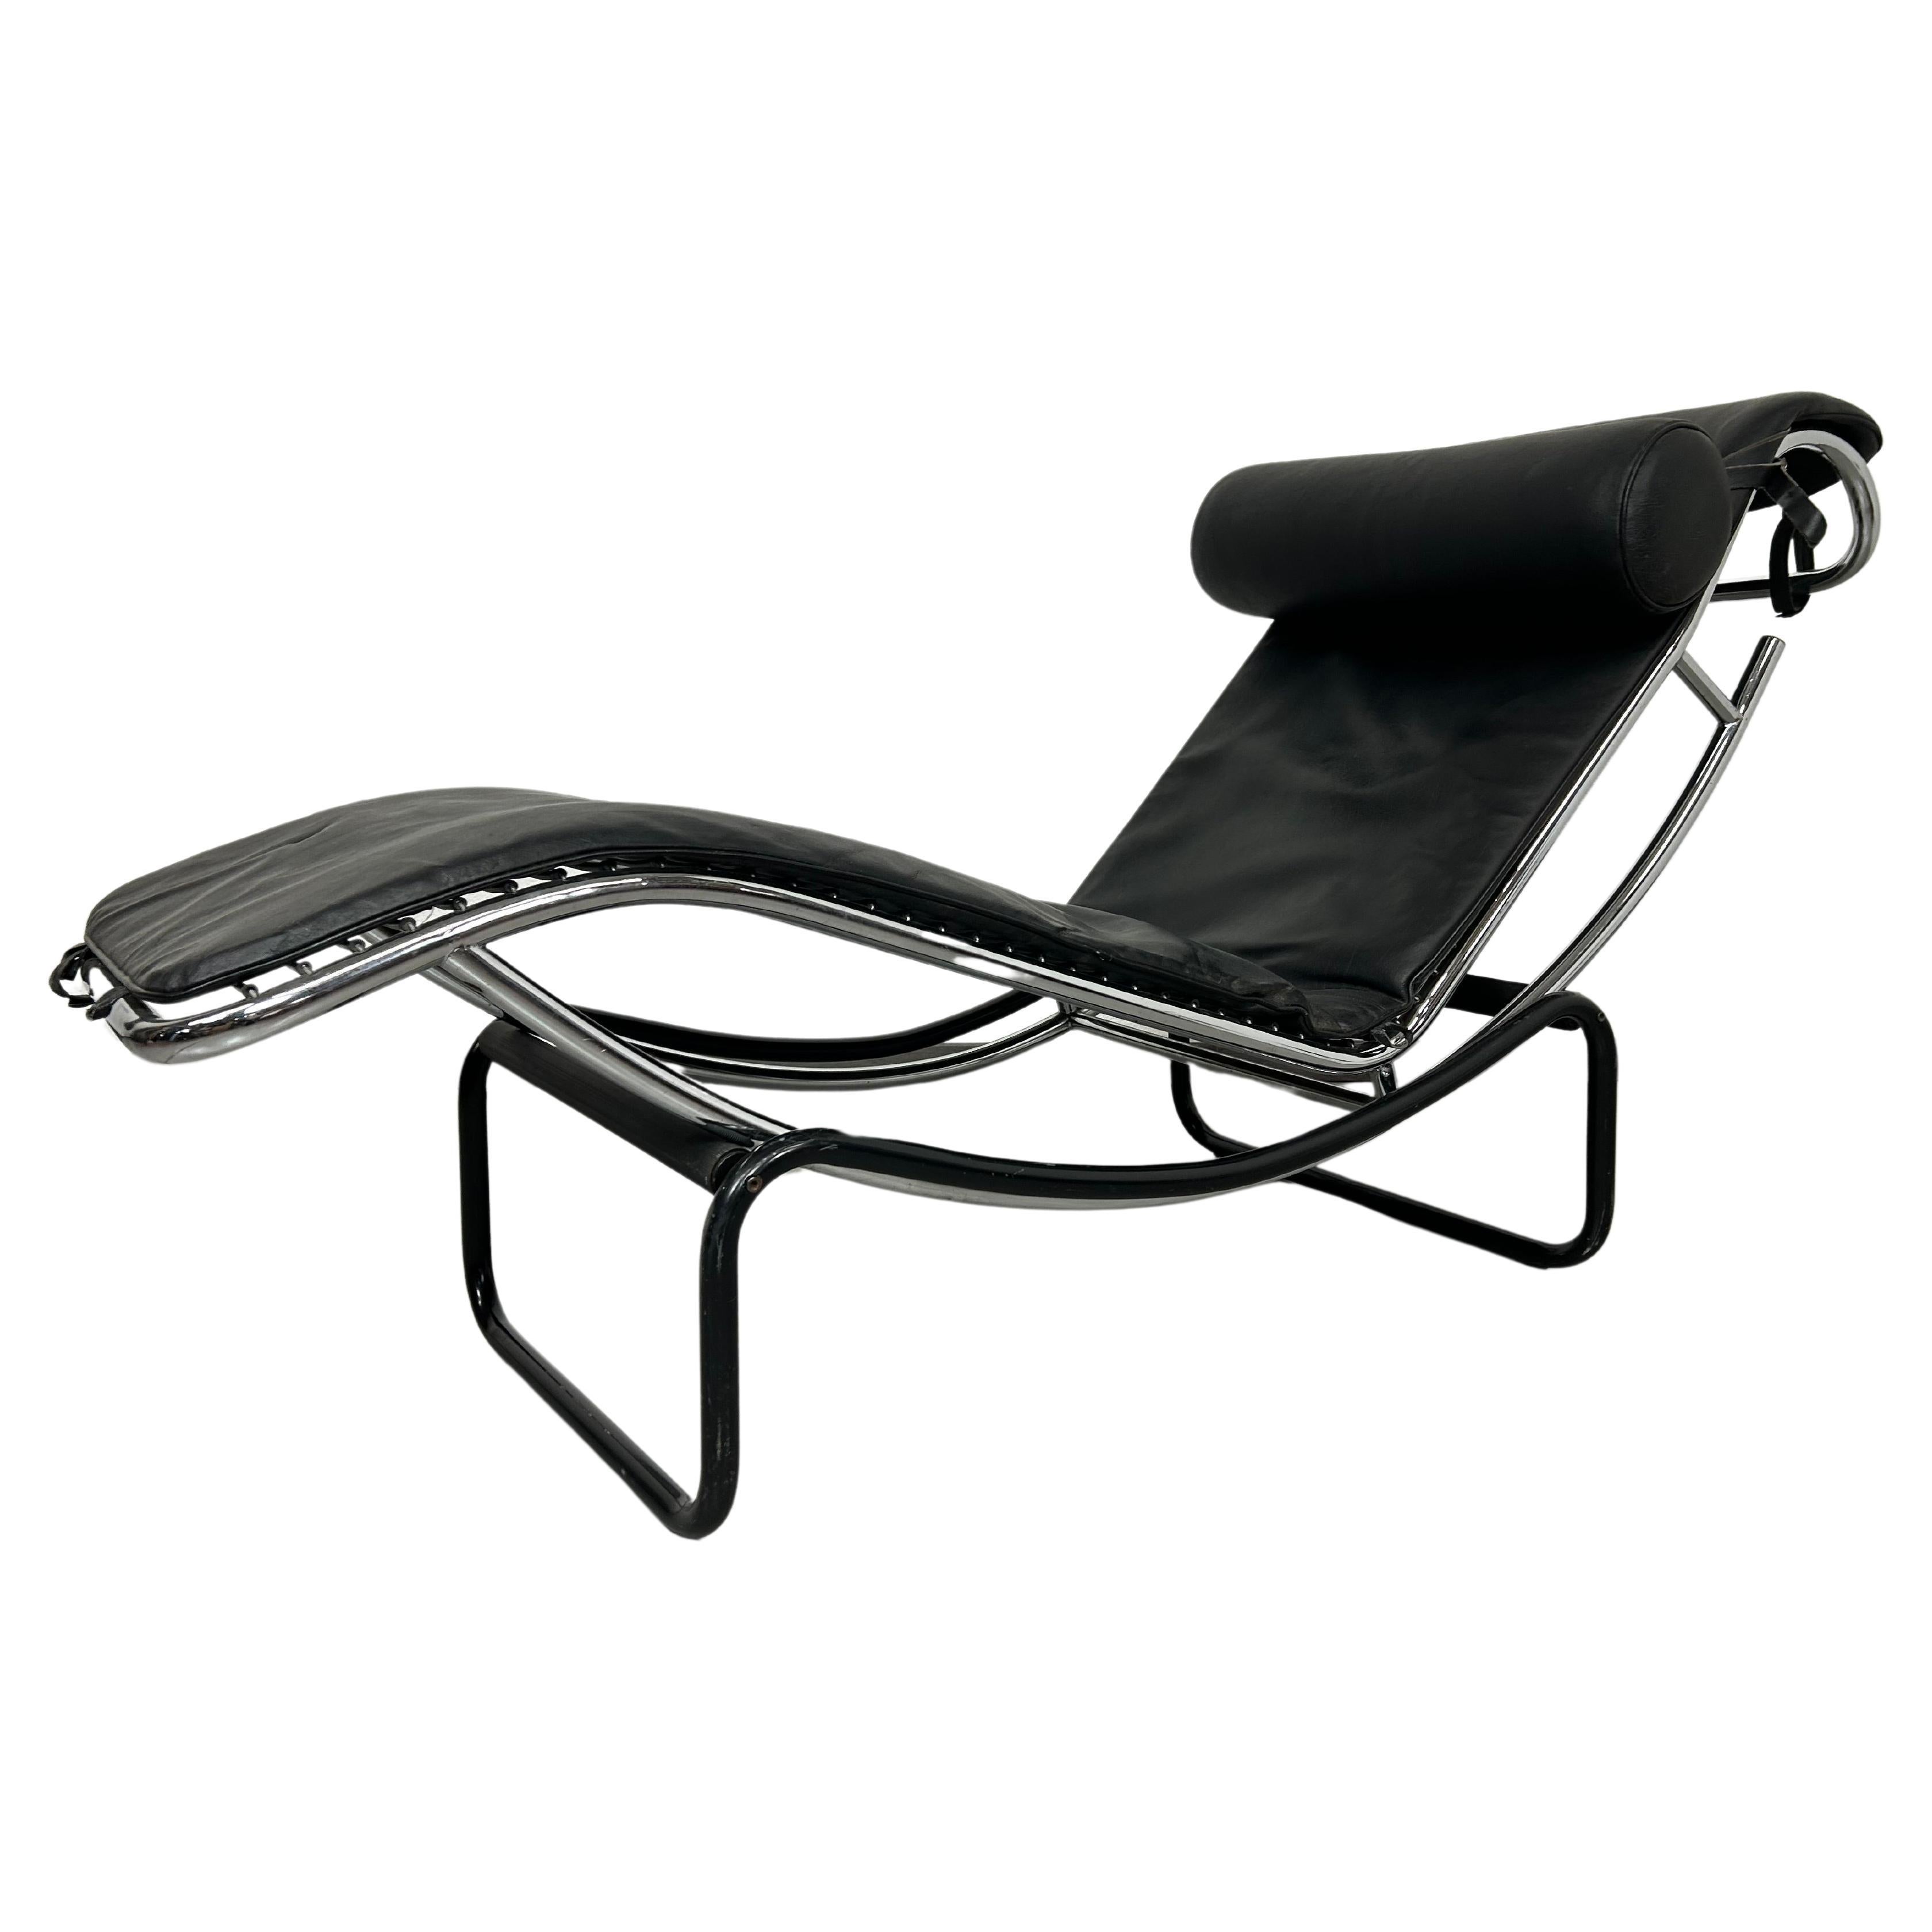 Chaise longue chair Amaca inspired by Le Corbusiers LC4 For Sale